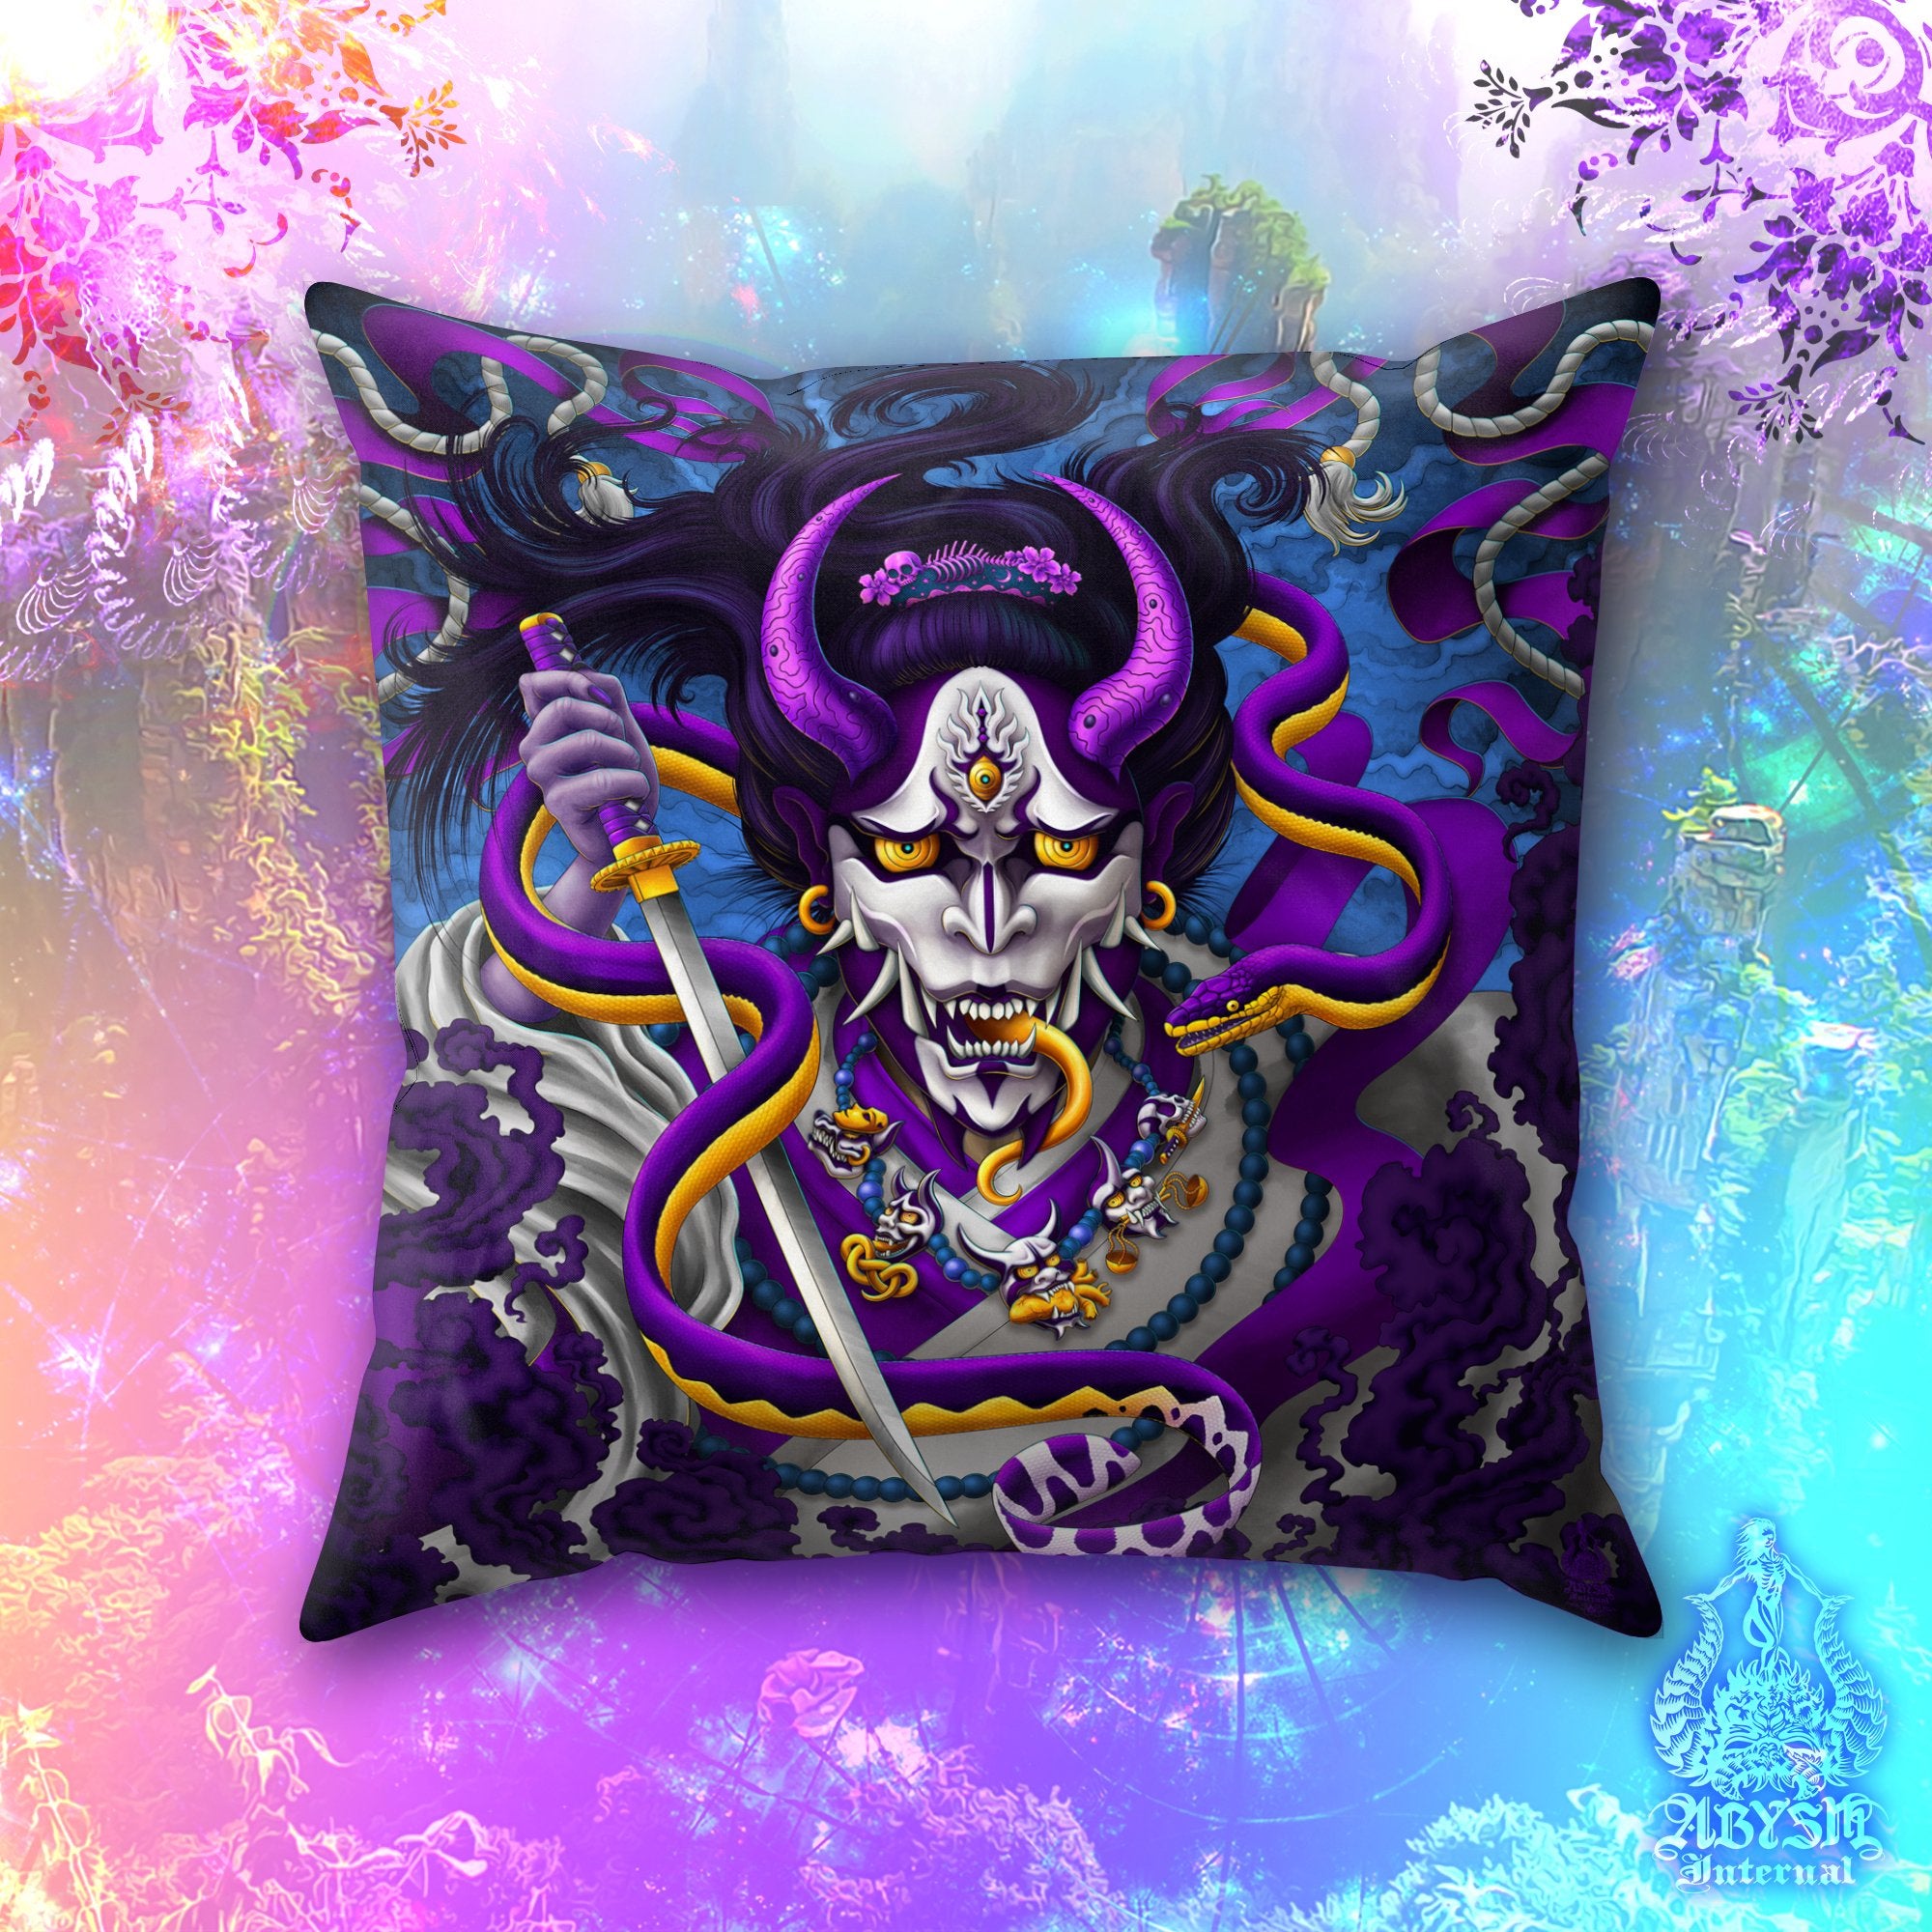 Hannya Throw Pillow, Decorative Accent Pillow, Square Cushion Cover, Japanese Demon & Snake, Gamer Room Decor - Blue & Purple - Abysm Internal